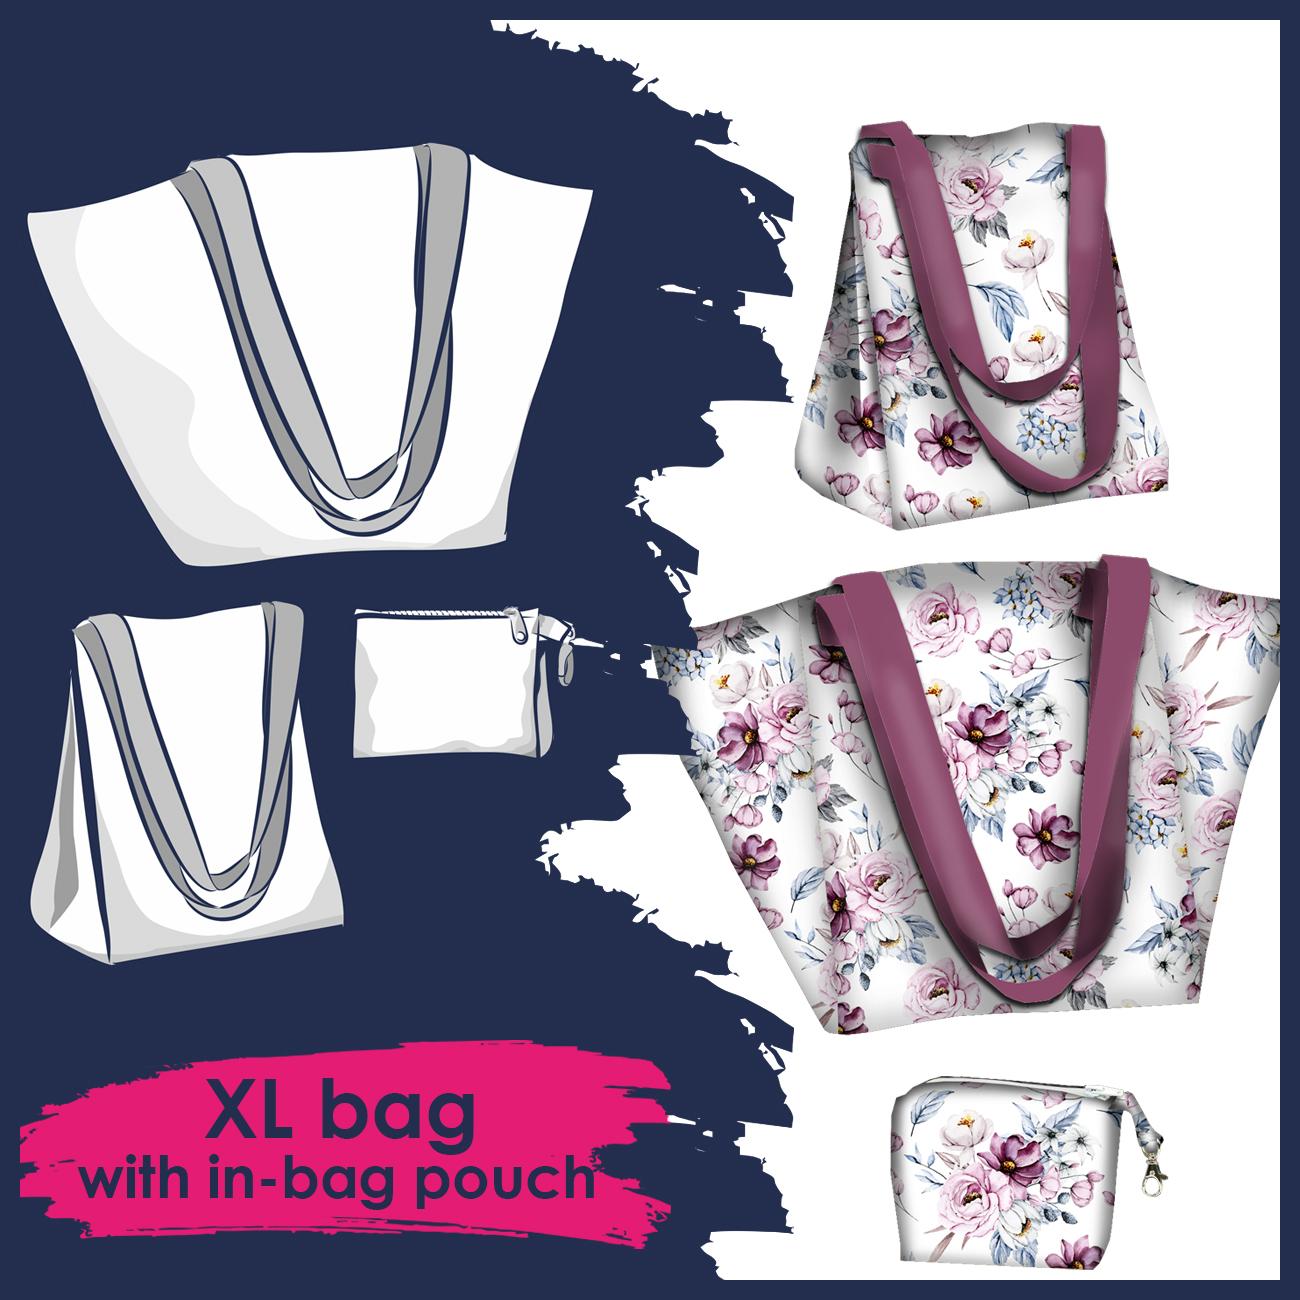 XL bag with in-bag pouch